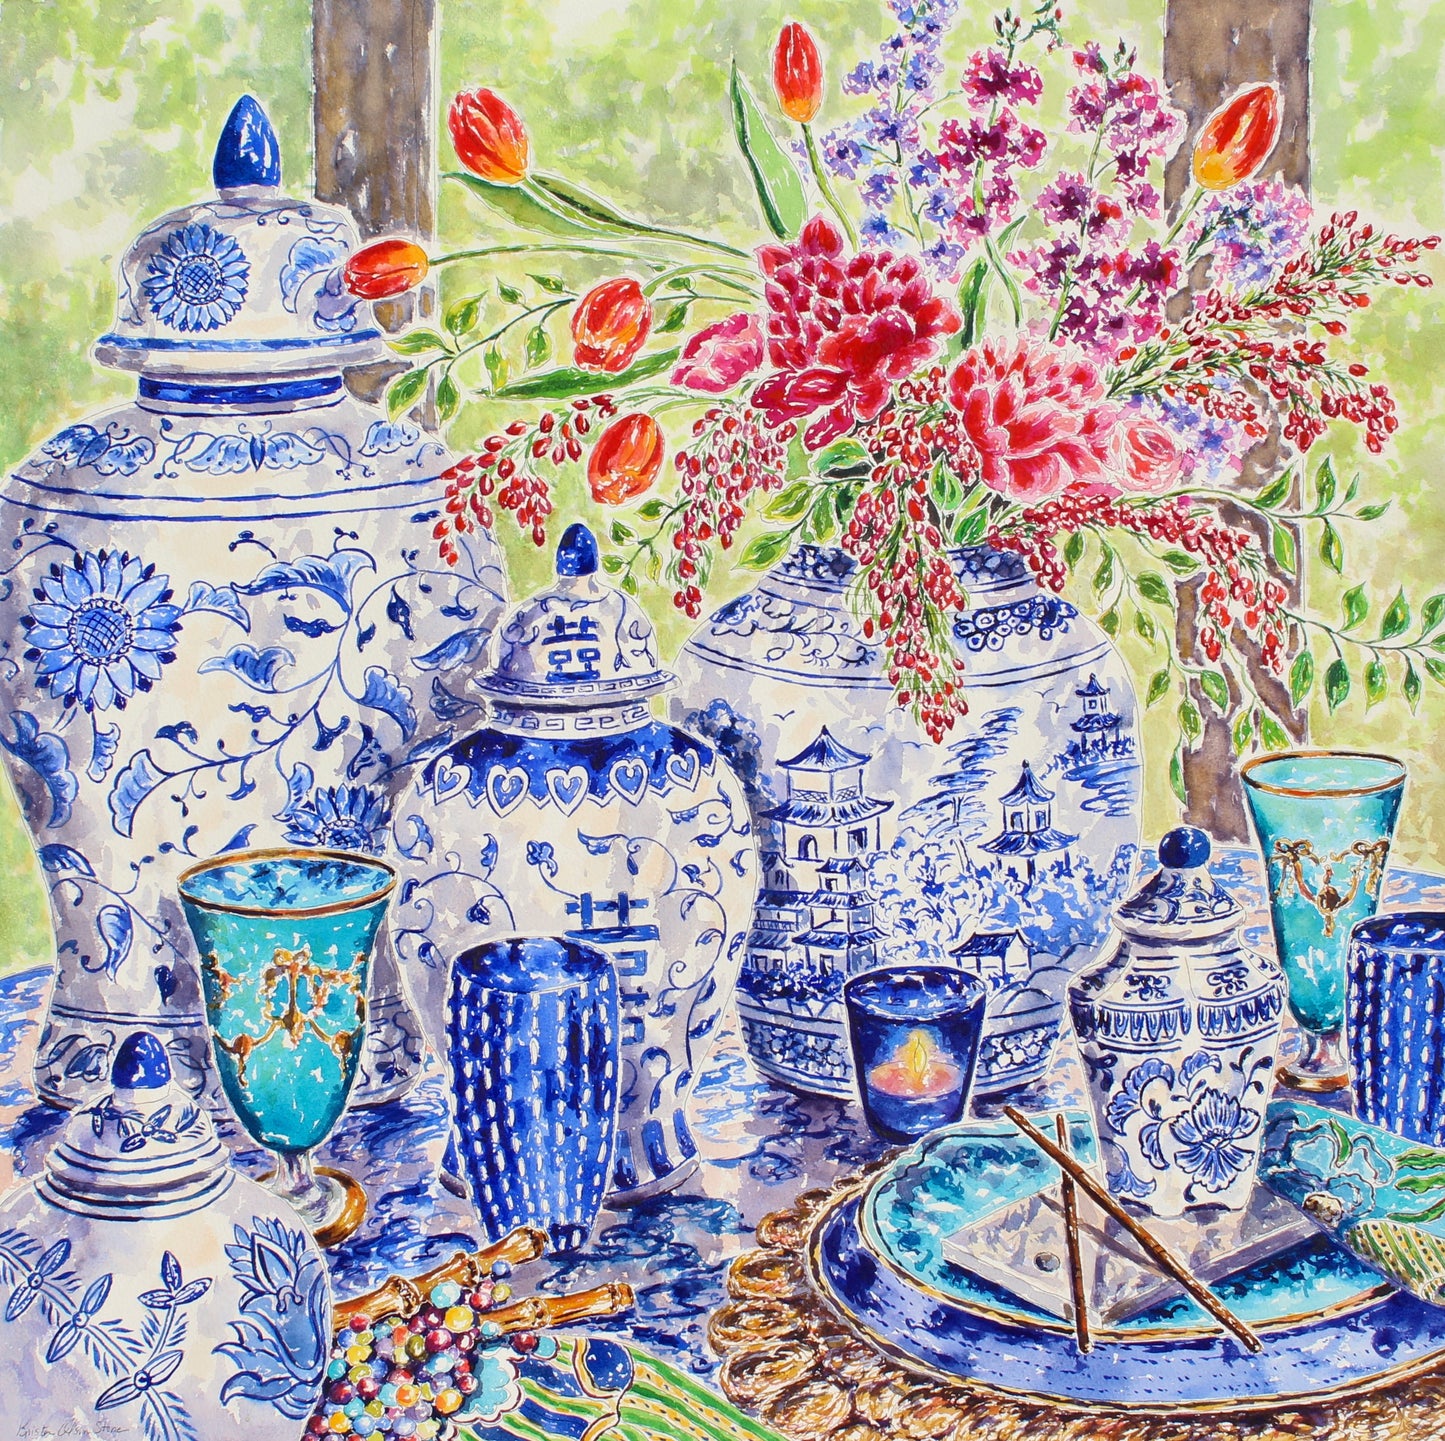 Where Colors Conspire, A Masterpiece To Impart, An Original 25.5" Square Watercolor And Ink Chinoiserie Painting